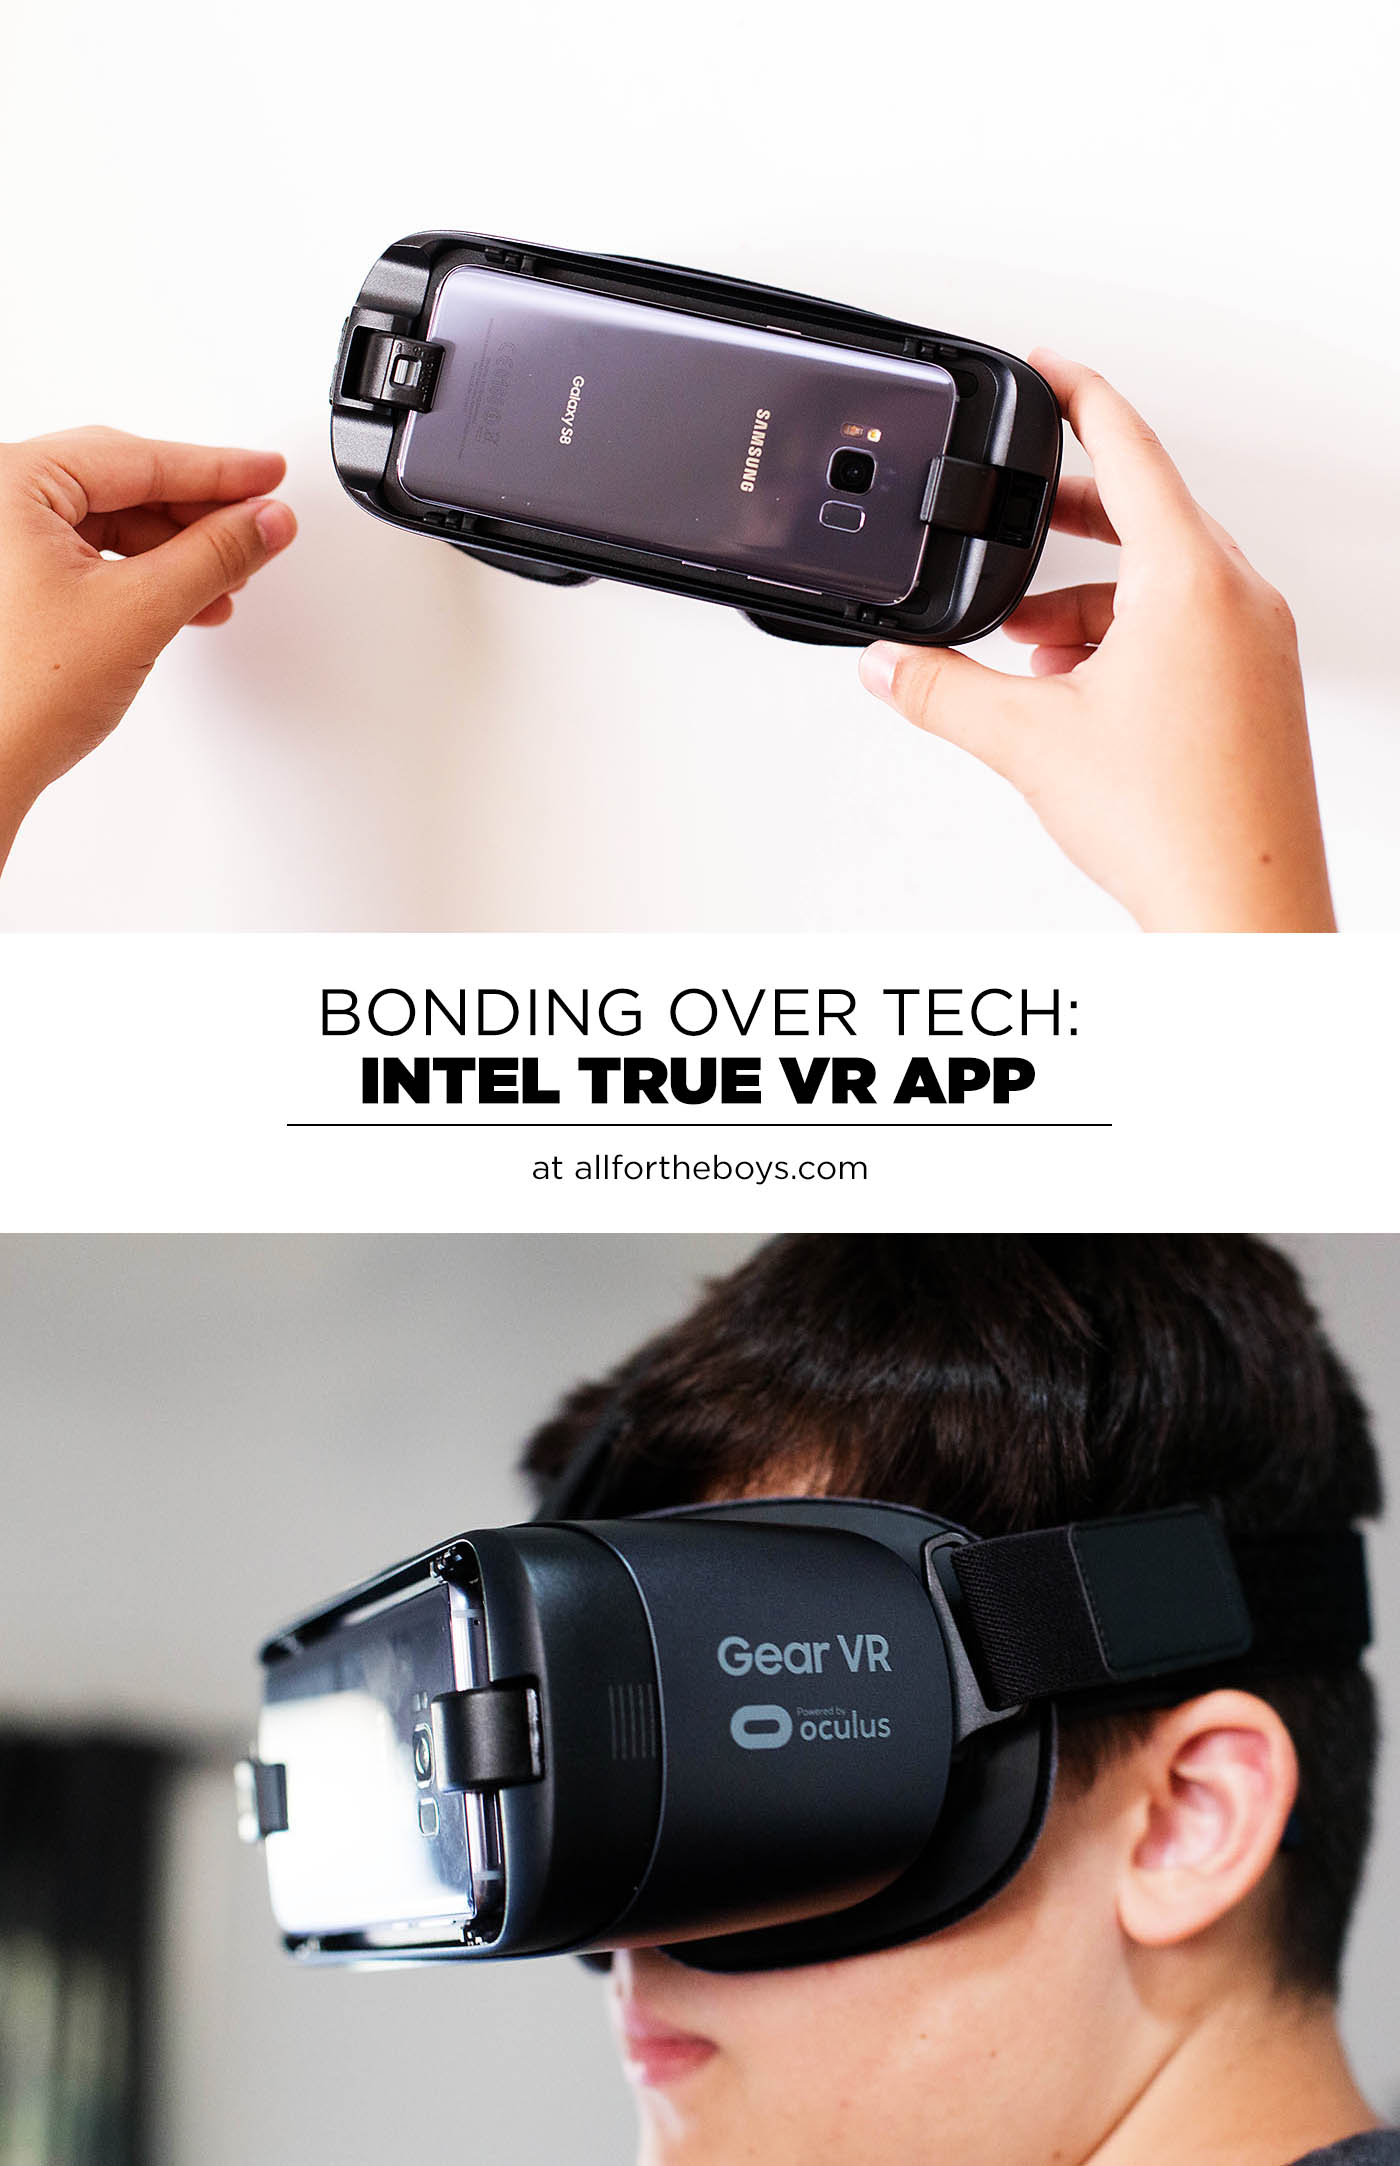 Bonding over technology with Intel True VR